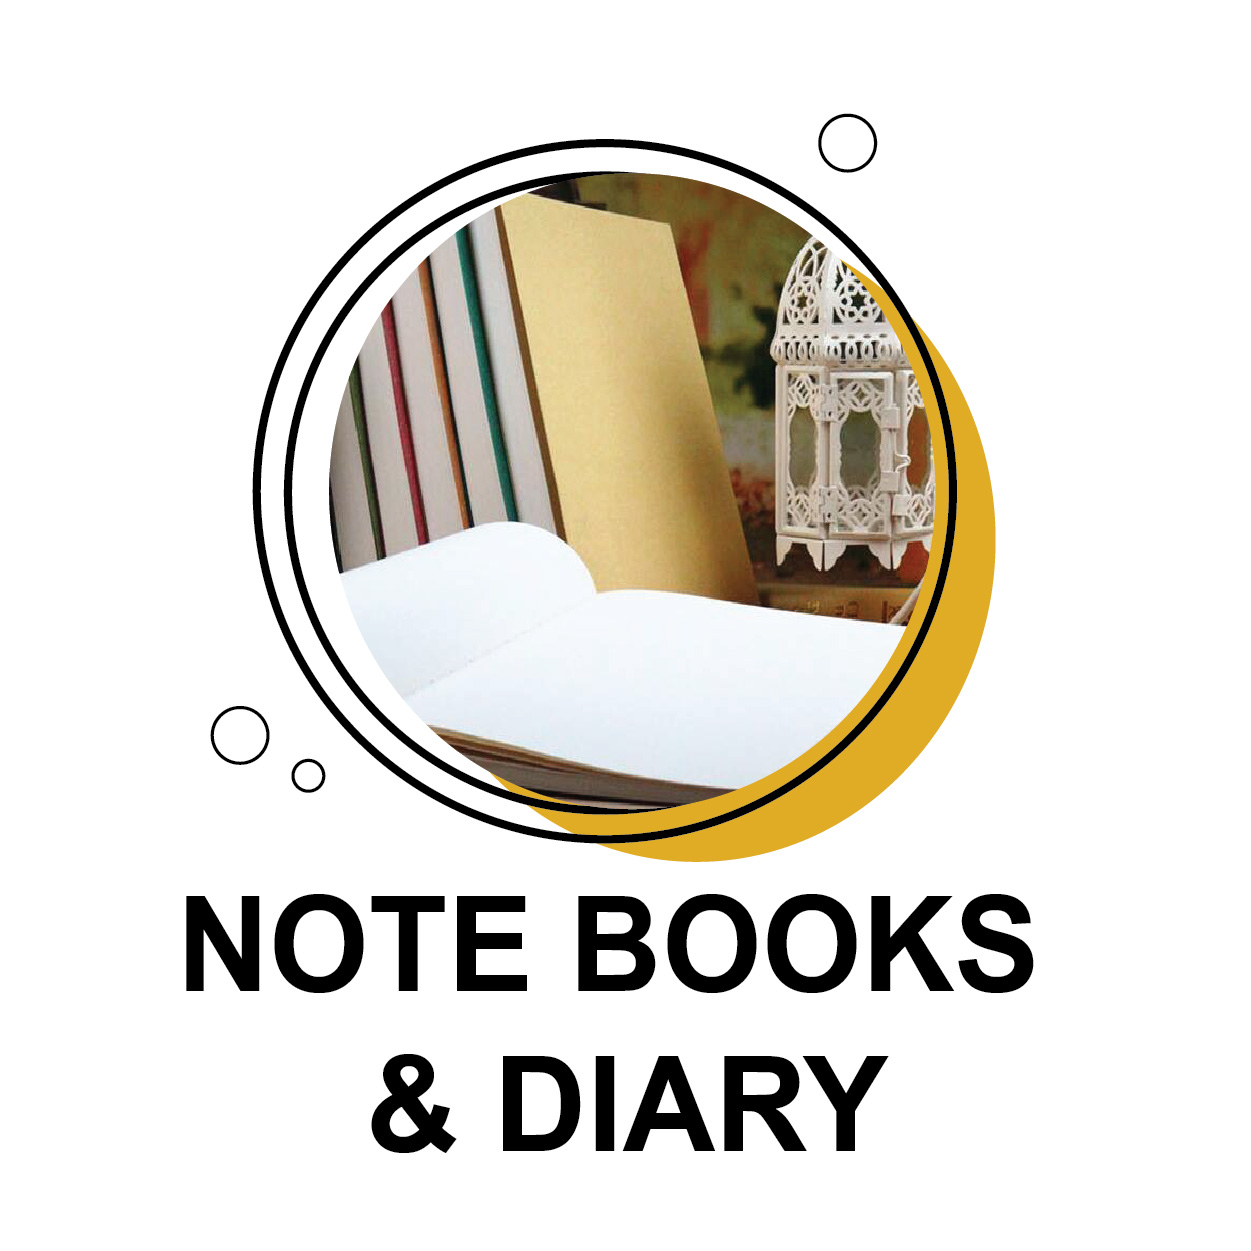 NOTE BOOKS & DIARY